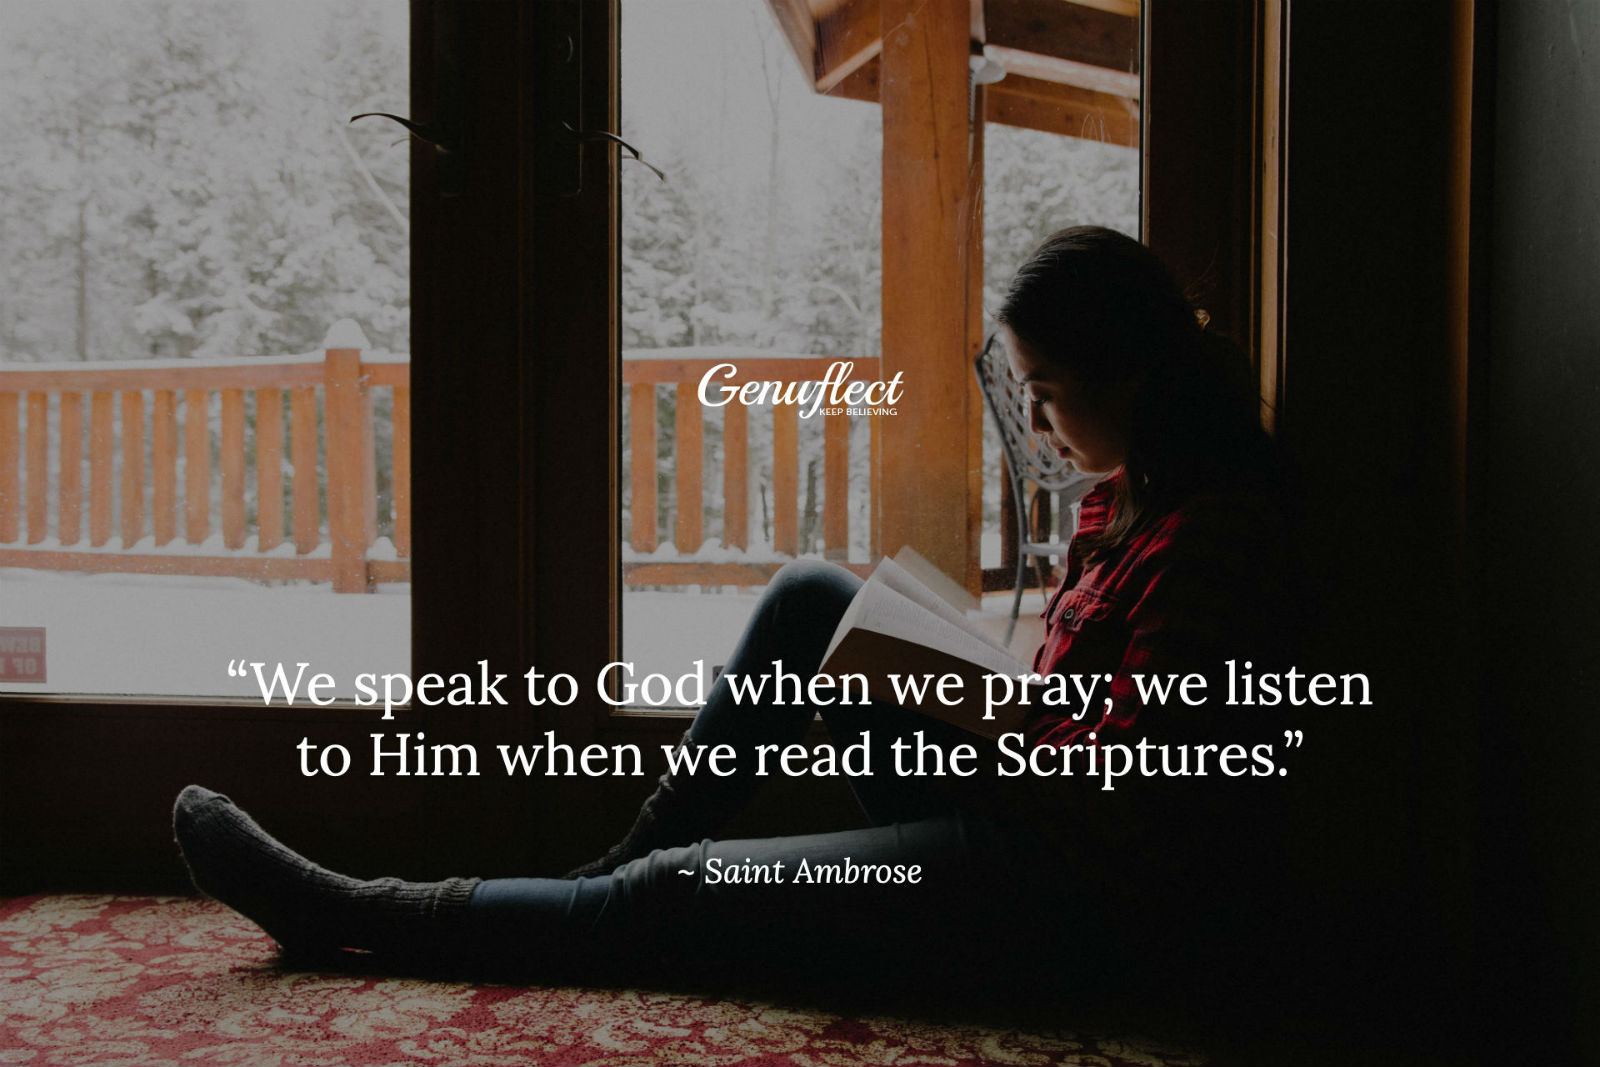 Genuflect - woman seated on the floor reading the Bible